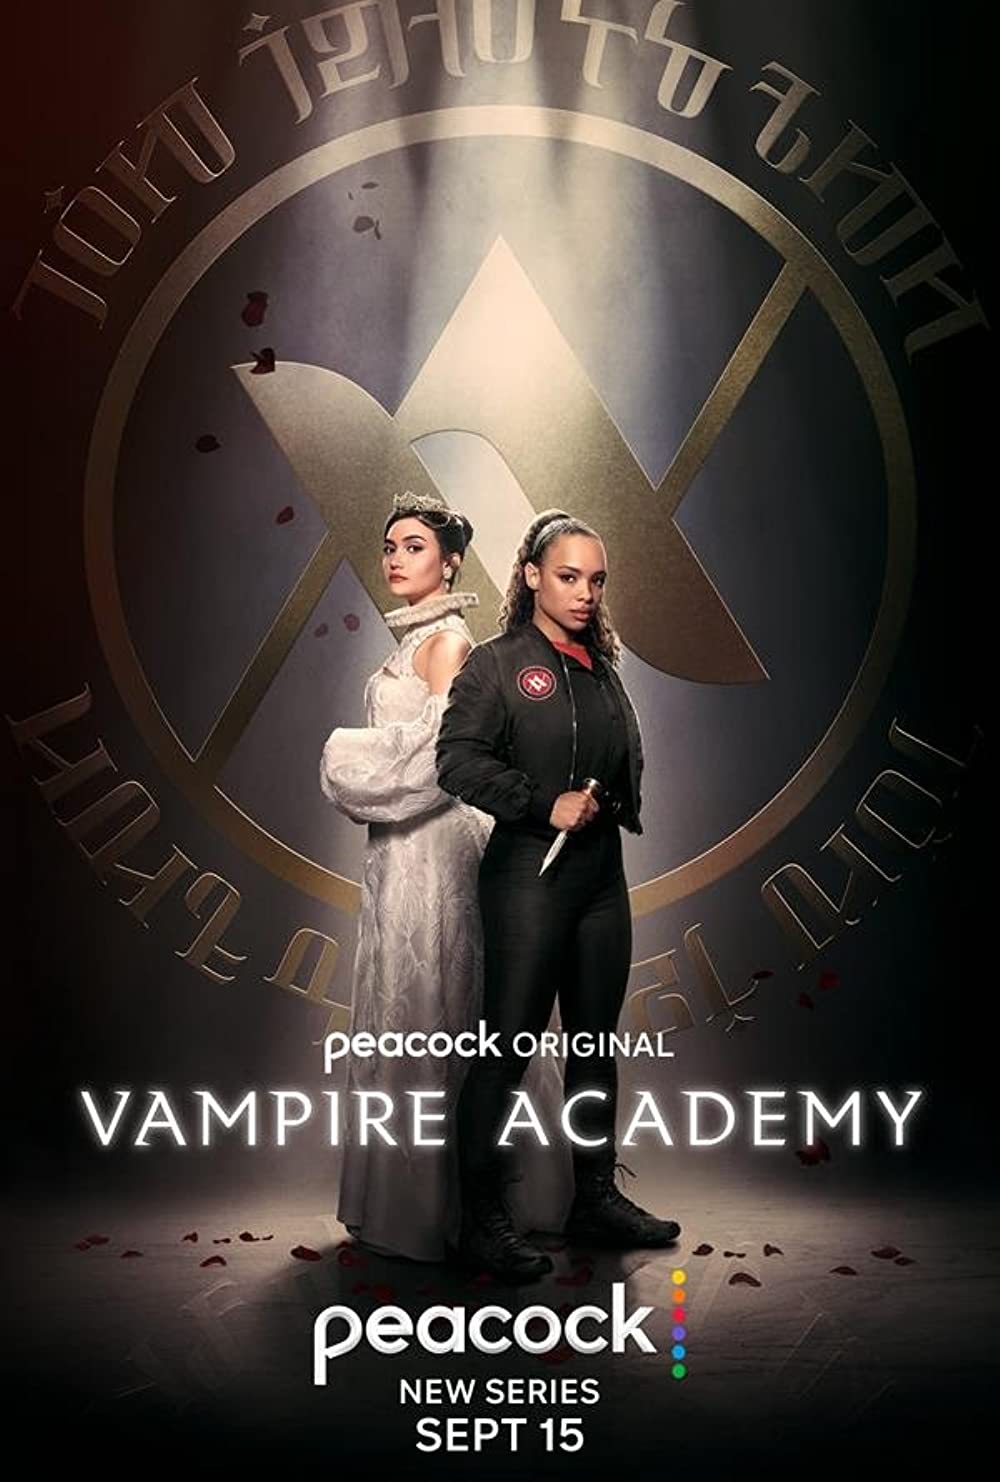 Vampire Academy TV Series (2022) Cast & Crew, Release Date, Episodes, Story, Review, Poster, Trailer
